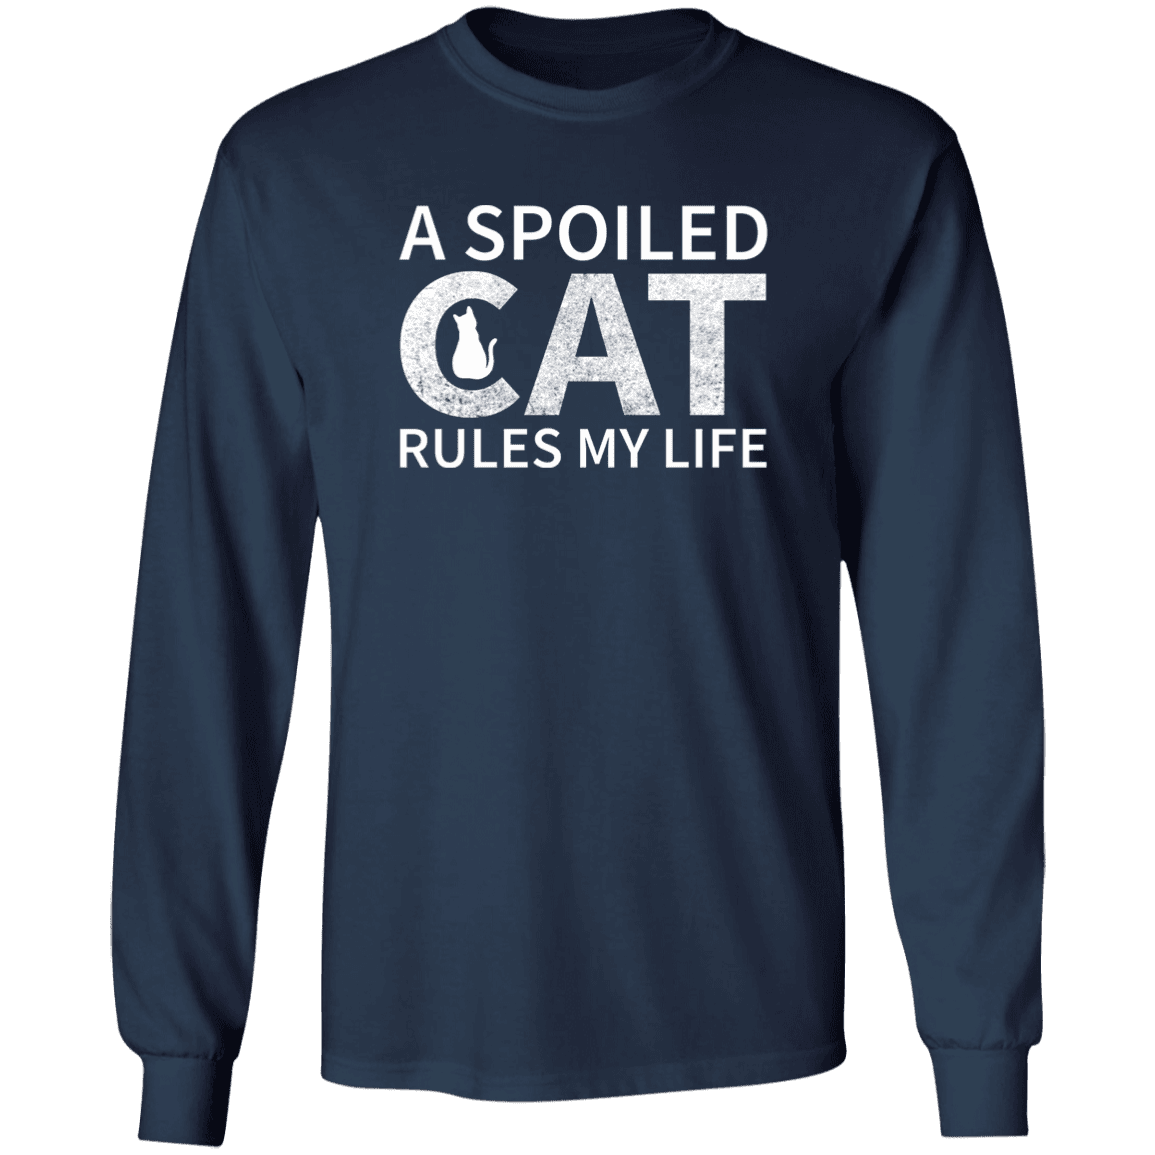 A Spoiled Cat Rules My Life - Long Sleeve T Shirt.